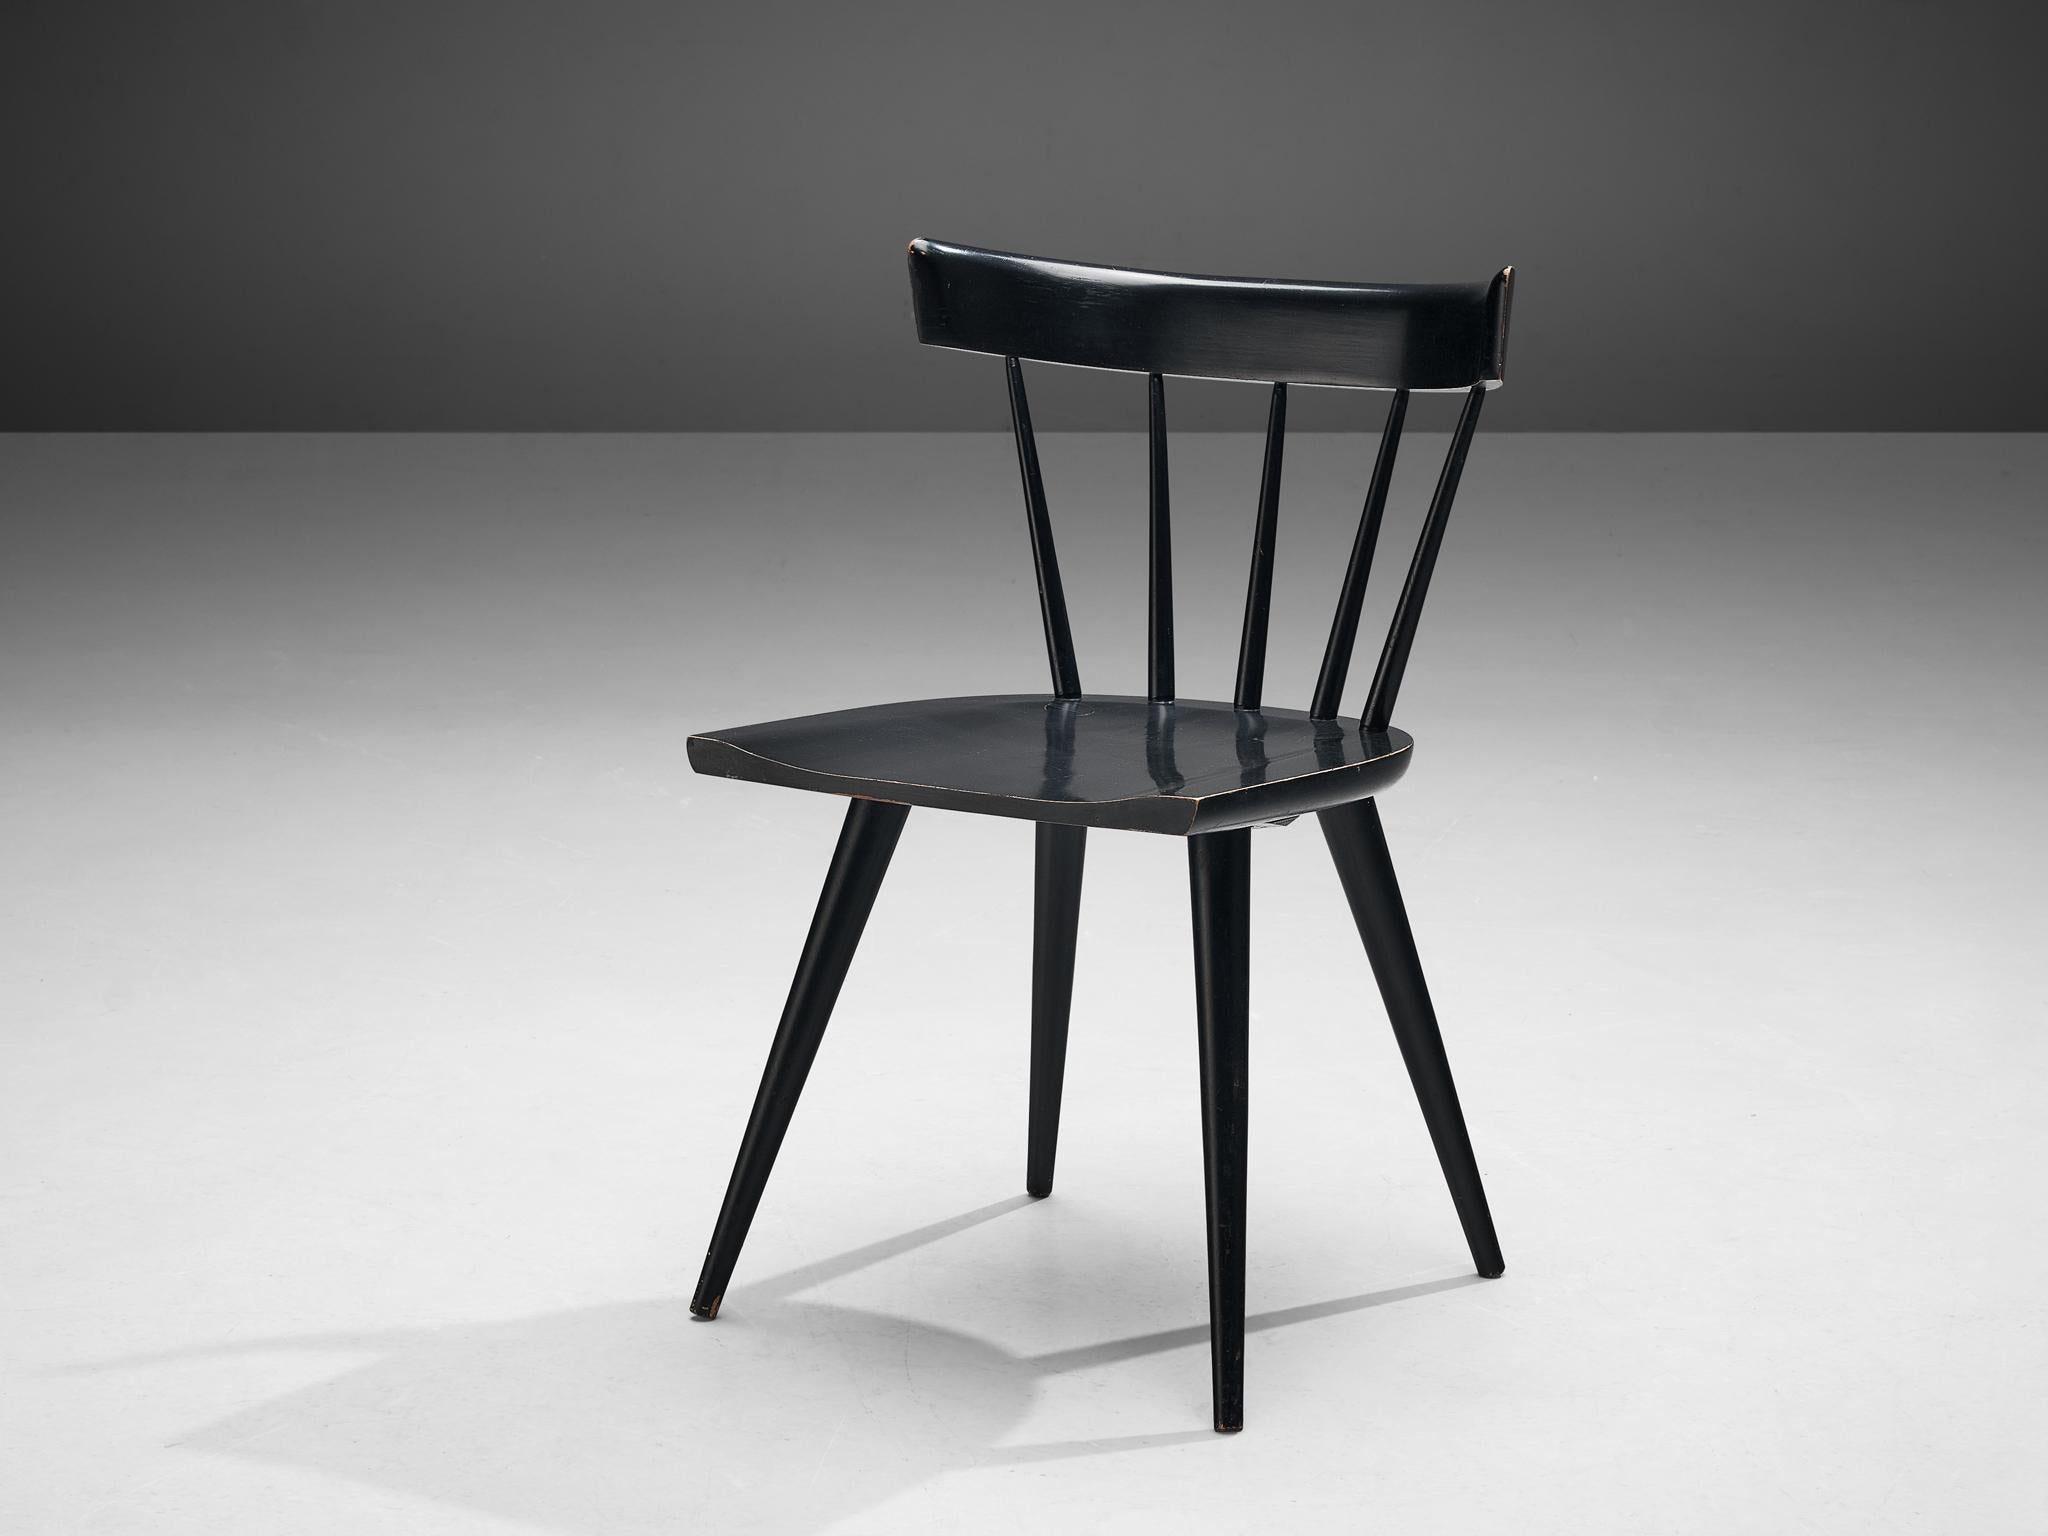 Paul McCobb, side chair, birch, United States, 1950s

Beautifully black Paul McCobb side chair. This well-composed chair combines aesthetics with comfort. A curved backrest held by thin spindles supports the sitter's back. A comfortably carved